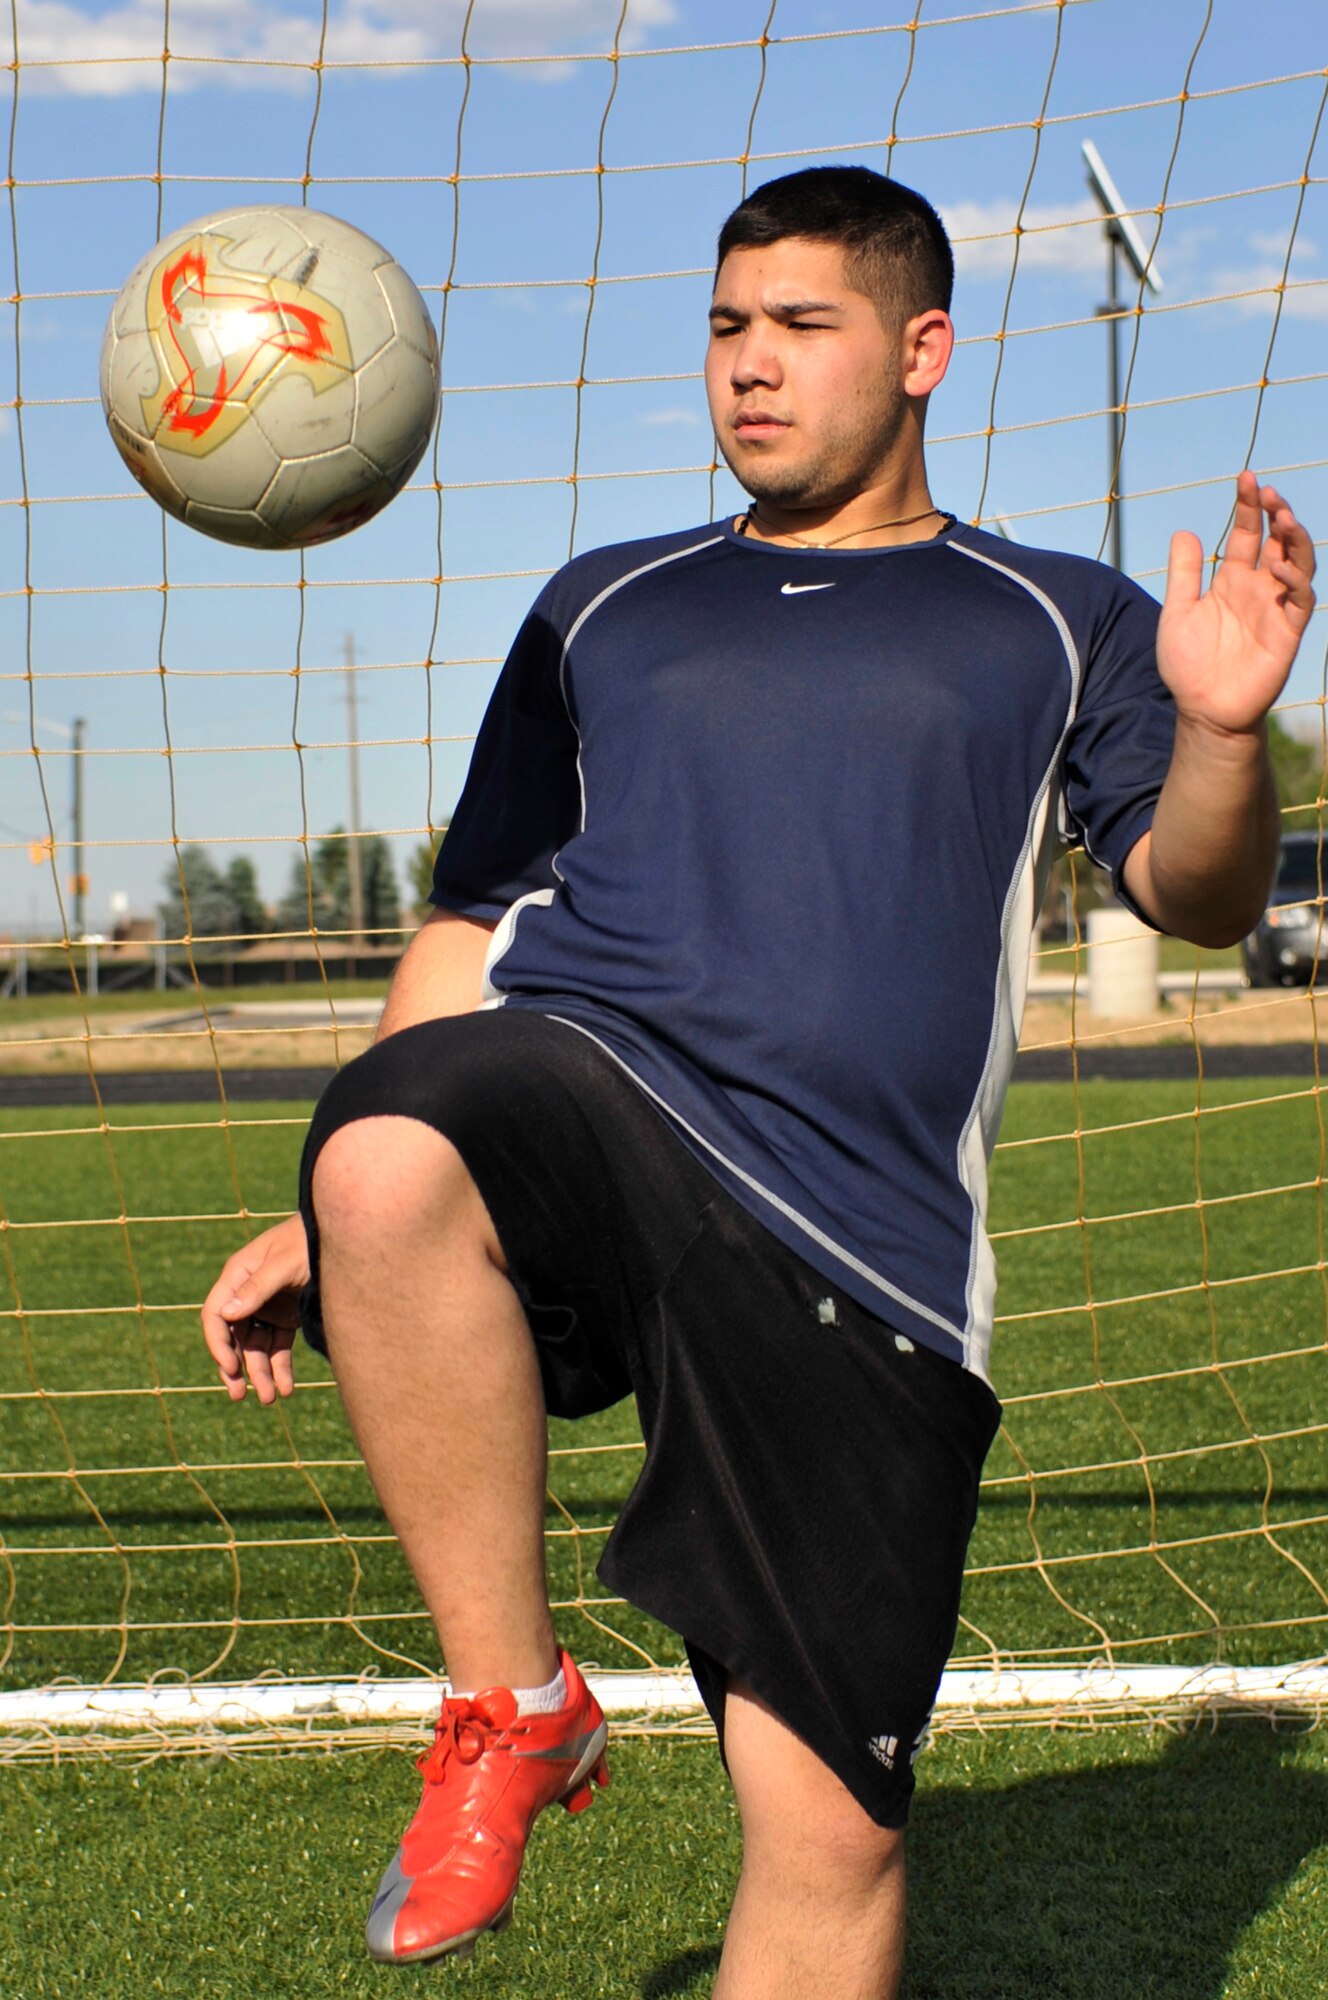 BUCKLEY AIR FORCE BASE, Colo. -- Airman 1st Class Nolan Luna-Chavez, 460th Space Communications Squadron, bounces a soccer ball on his knee to stay agile. No matter what the season's outcome, Airman Luna-Chavez says he still maintains good sportsmanship and respects his fellow athletes. (U.S. photo by Airman 1st Class Paul Labbe)